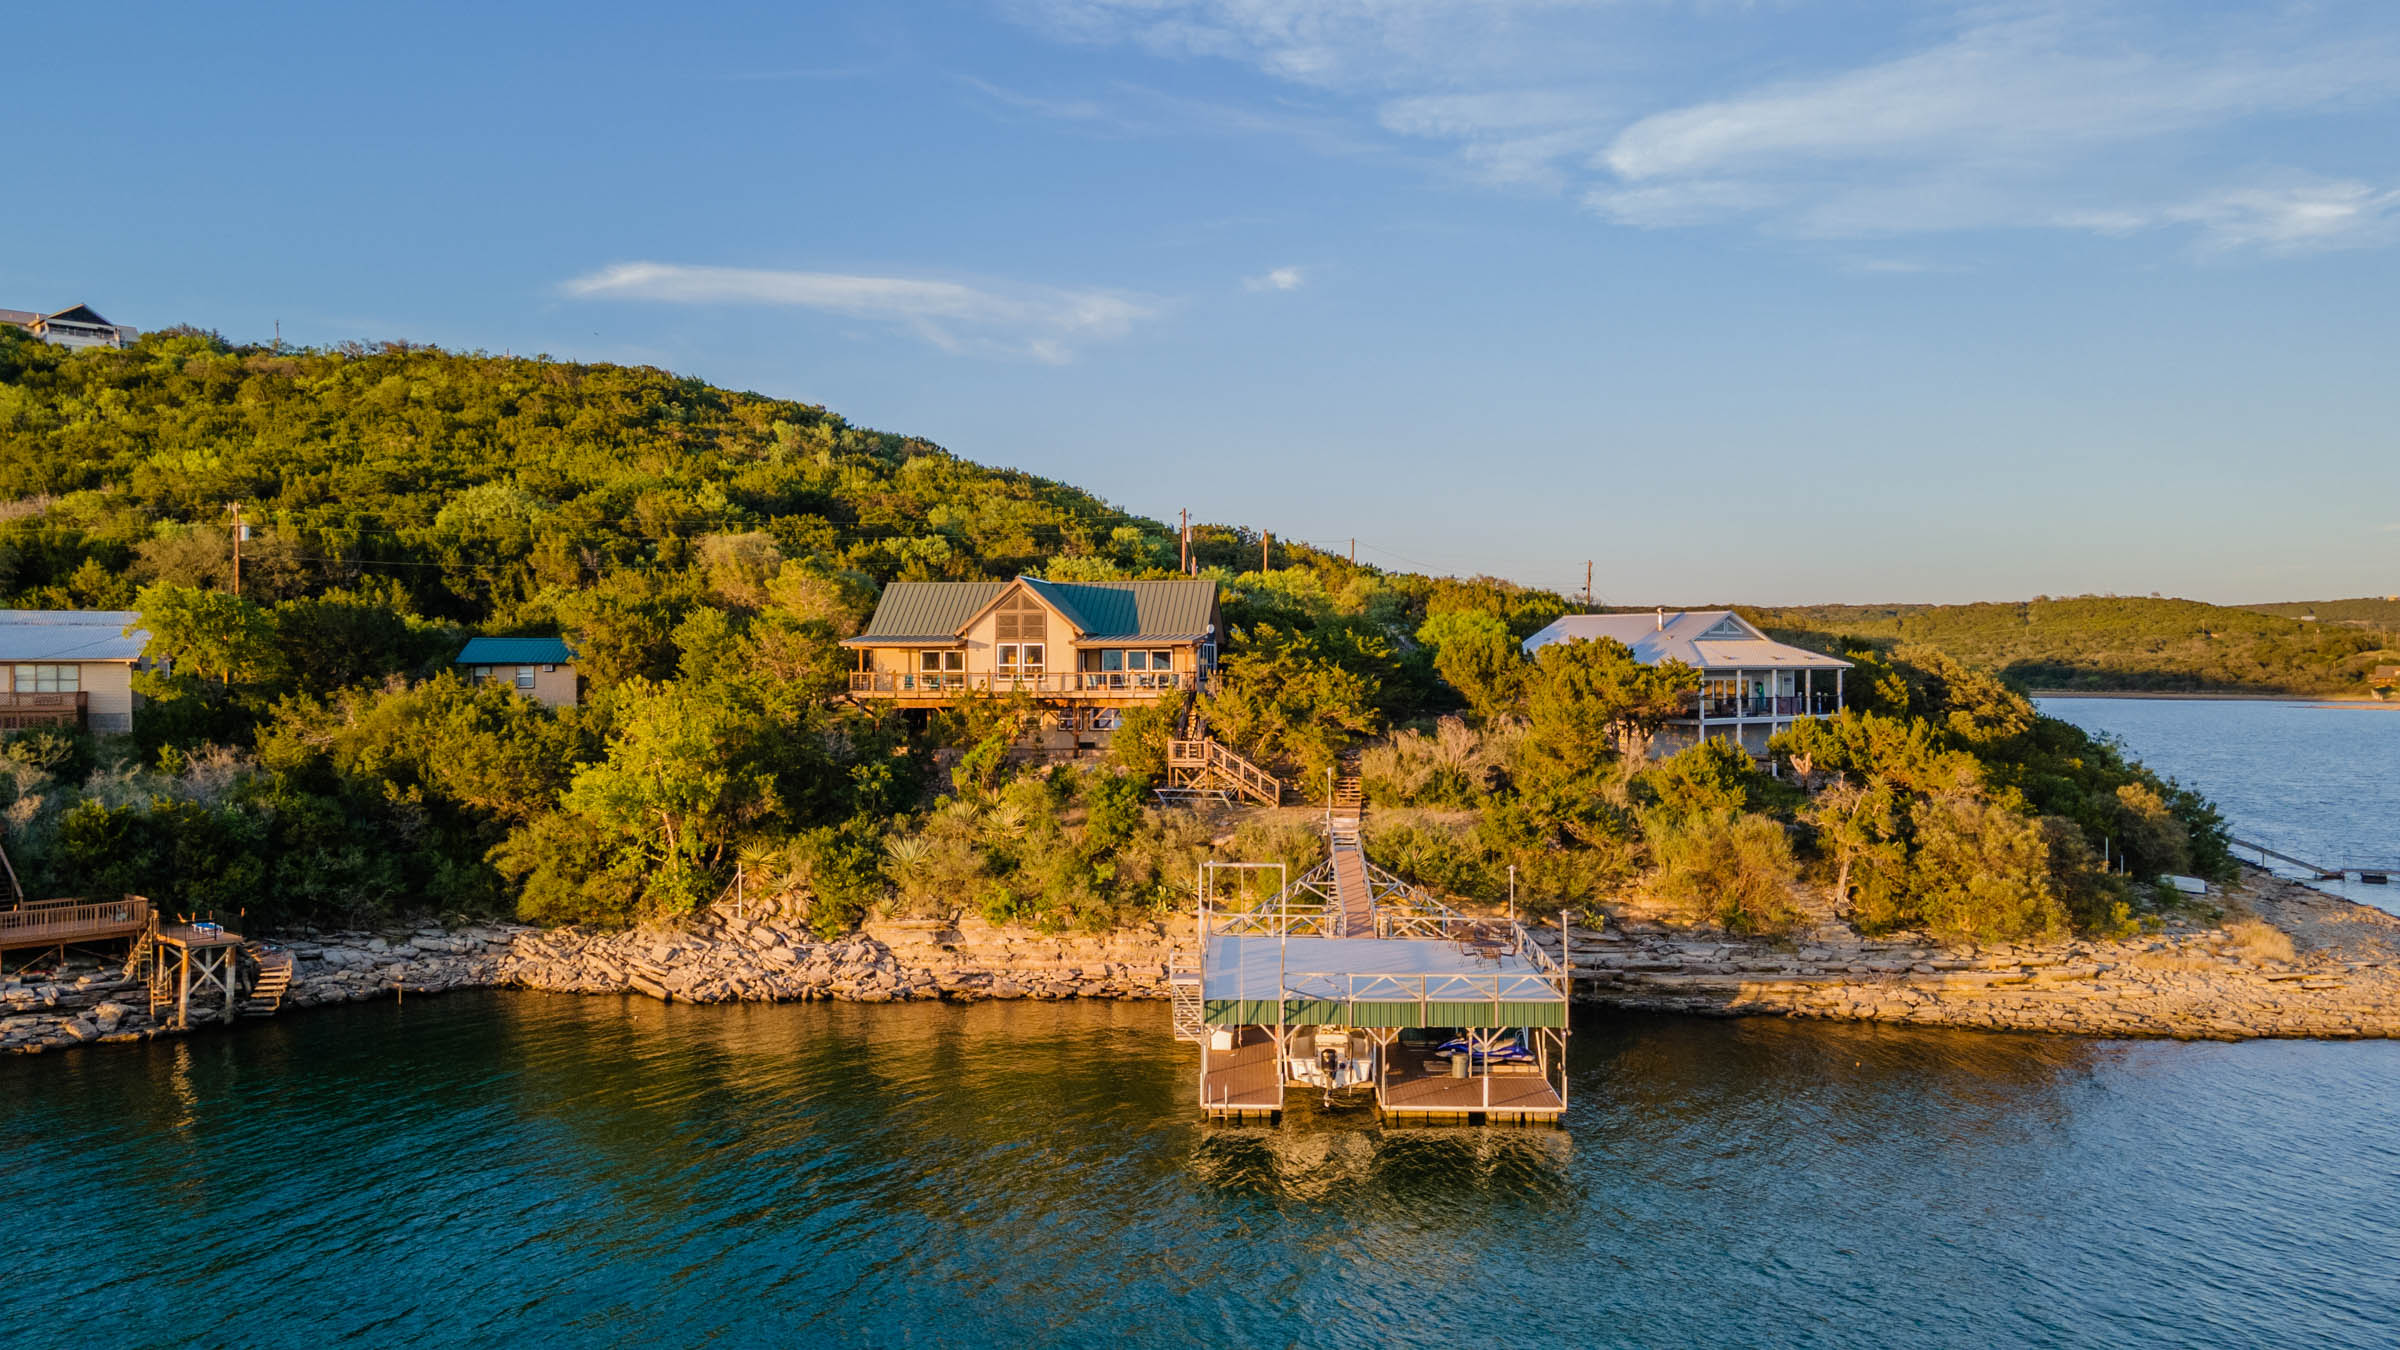 Listing photo of a home in Austin on the lake, taken with a drone